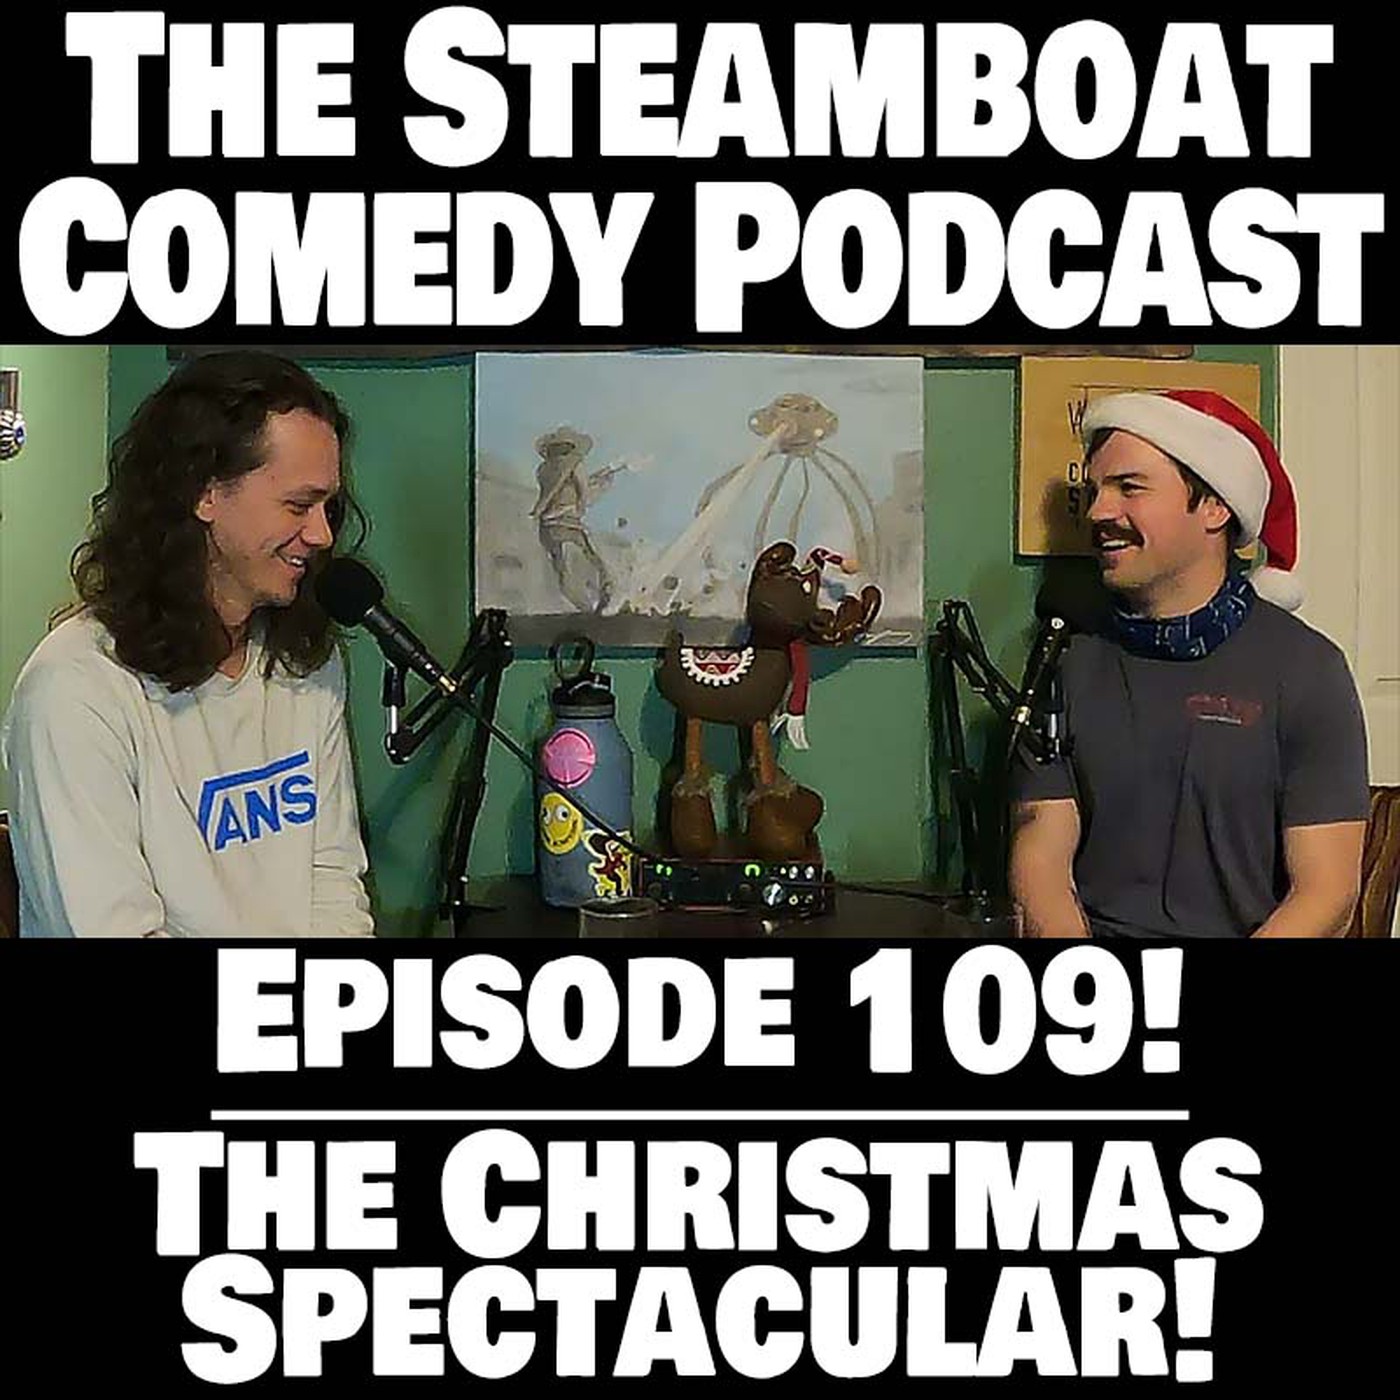 The Steamboat Comedy Podcast